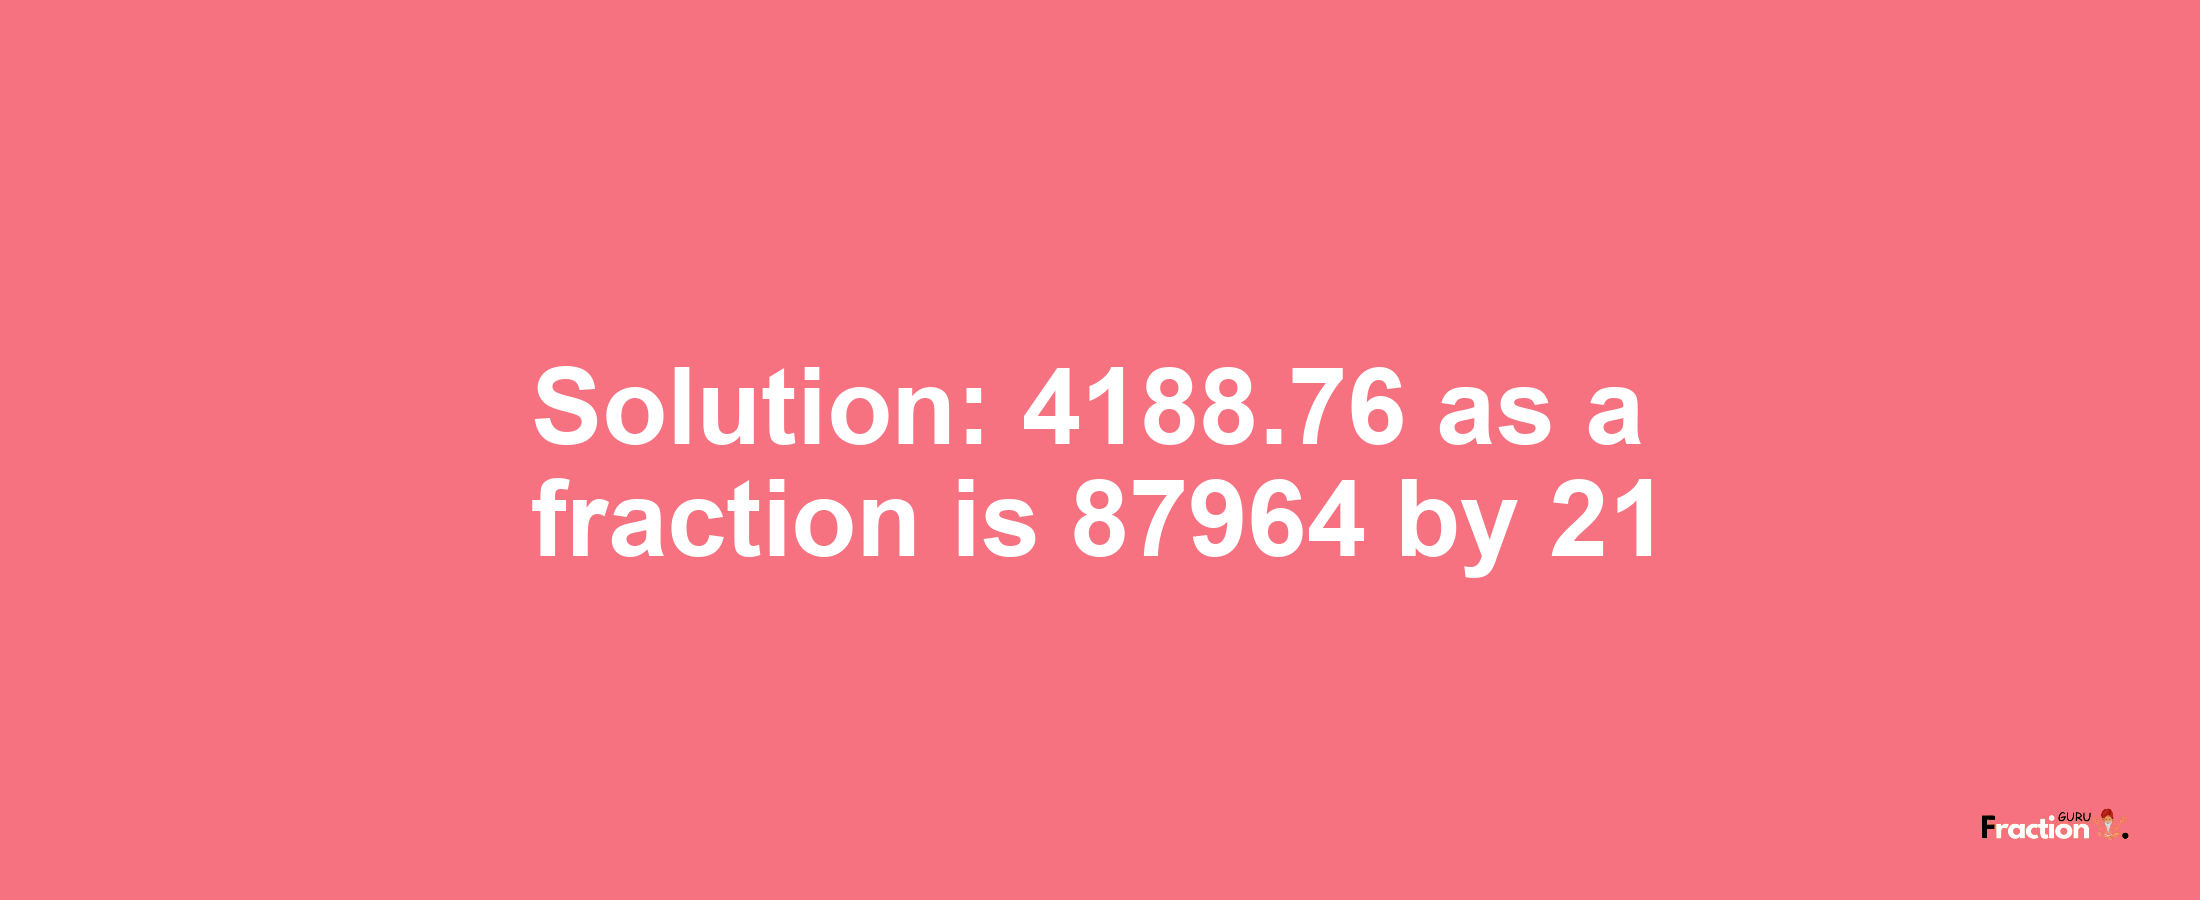 Solution:4188.76 as a fraction is 87964/21